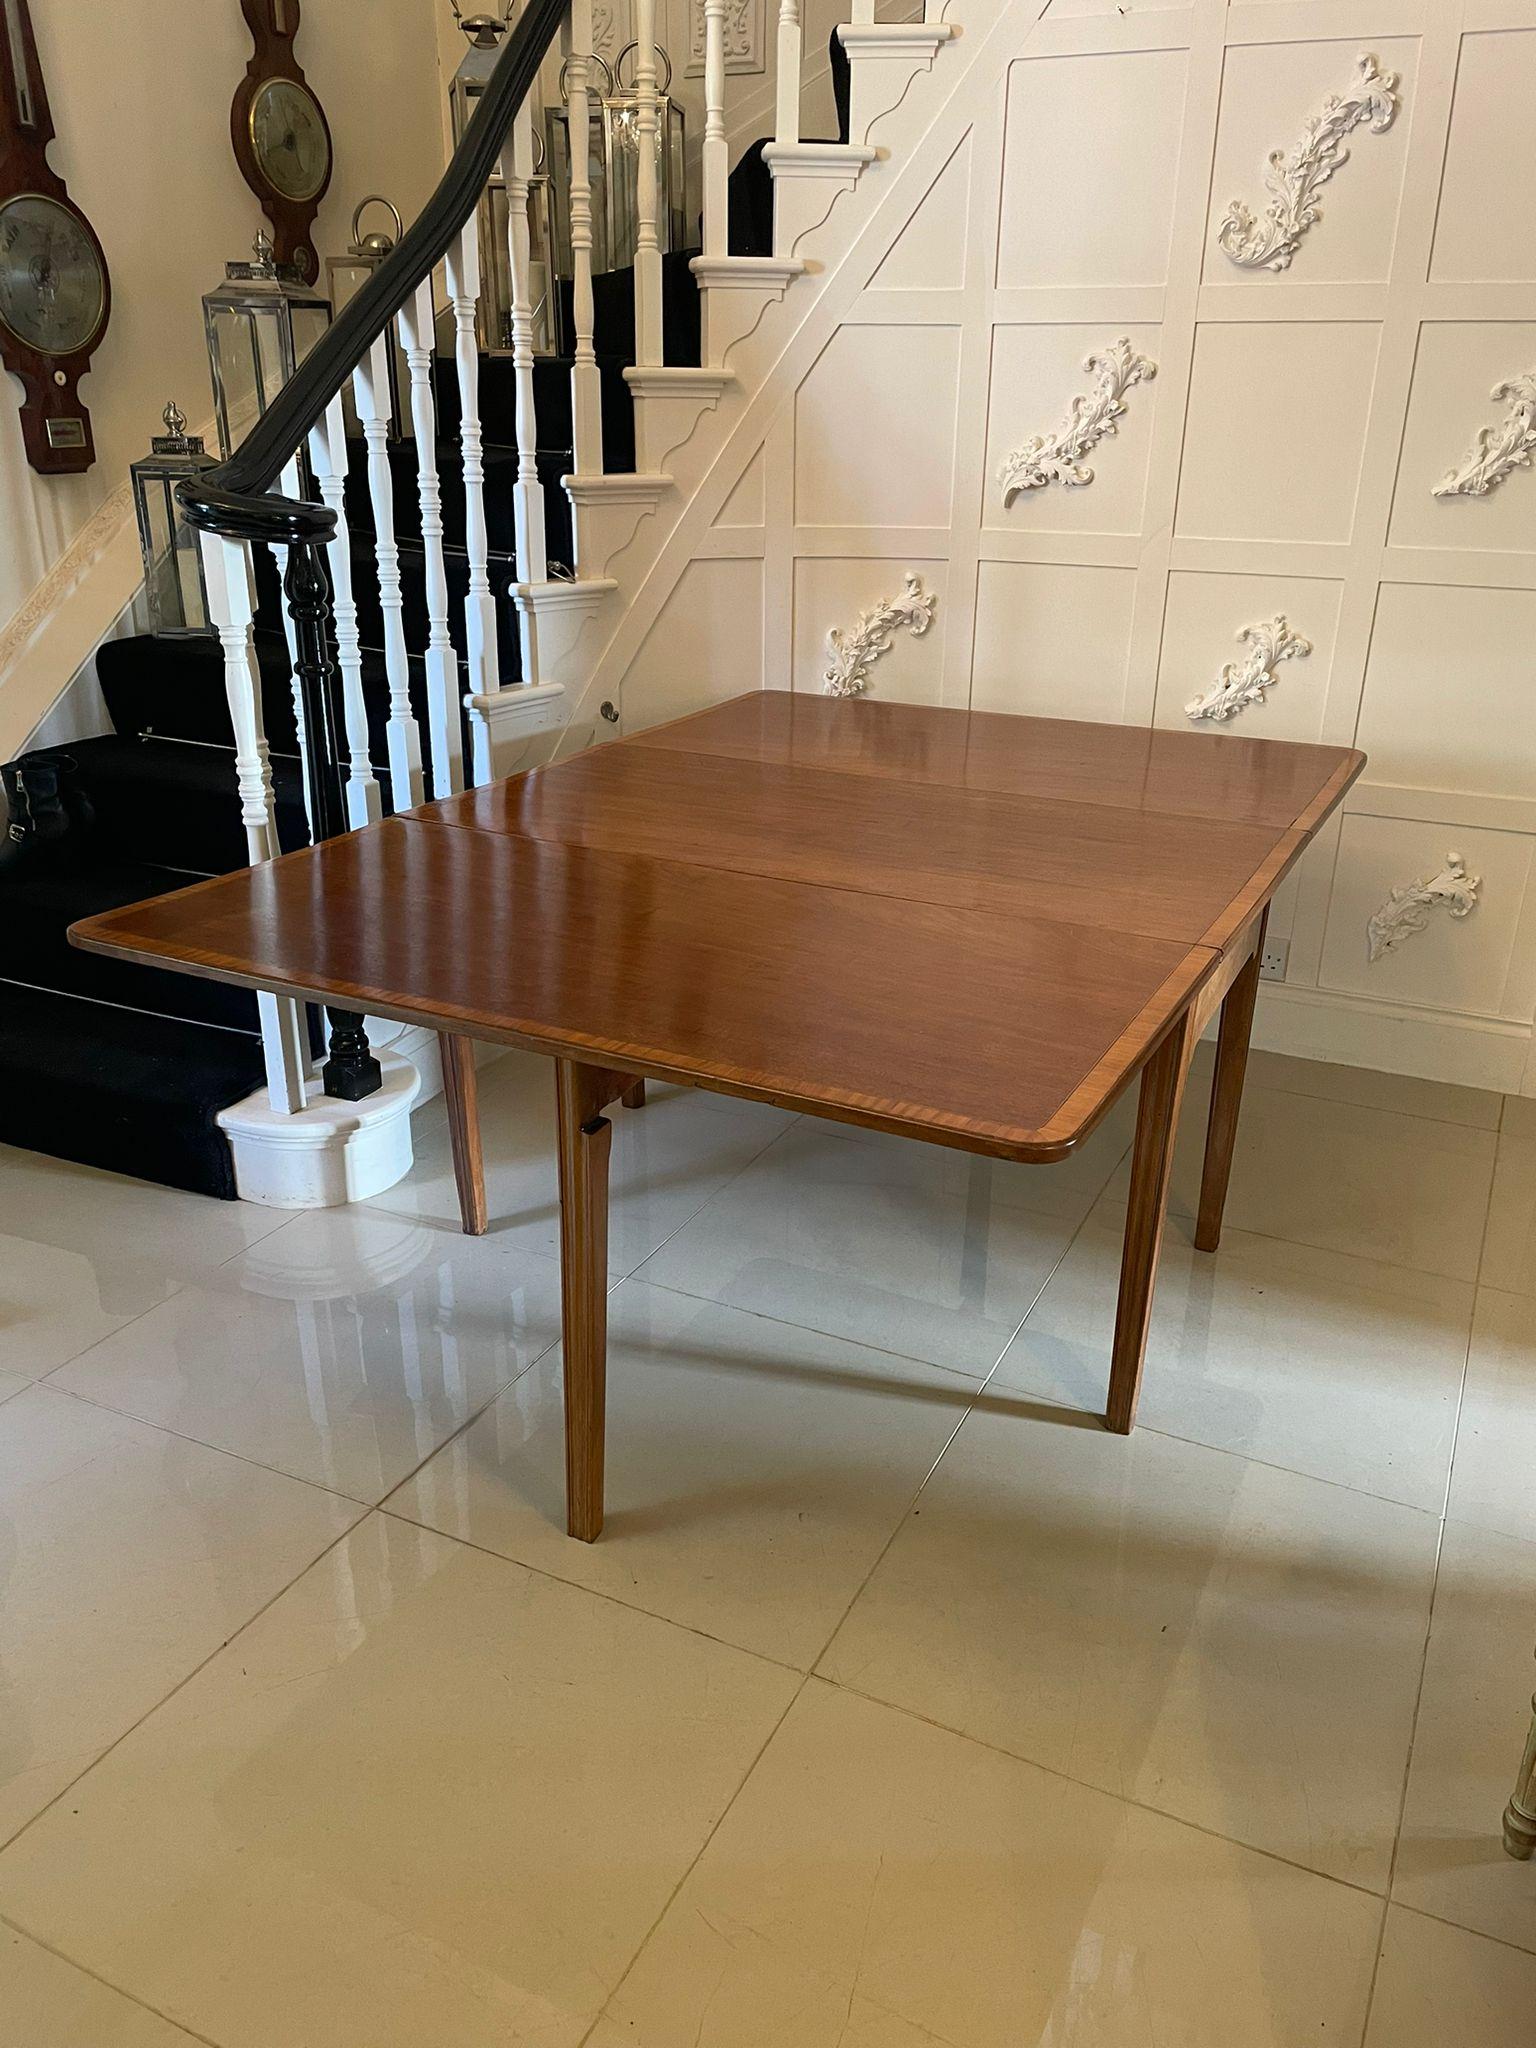 Antique George III quality mahogany drop leaf dining table having a quality mahogany top with two drop leaves beautifully crossbanded in satinwood and standing on six moulded legs with two gatelegs.

An attractive example having a very desirable